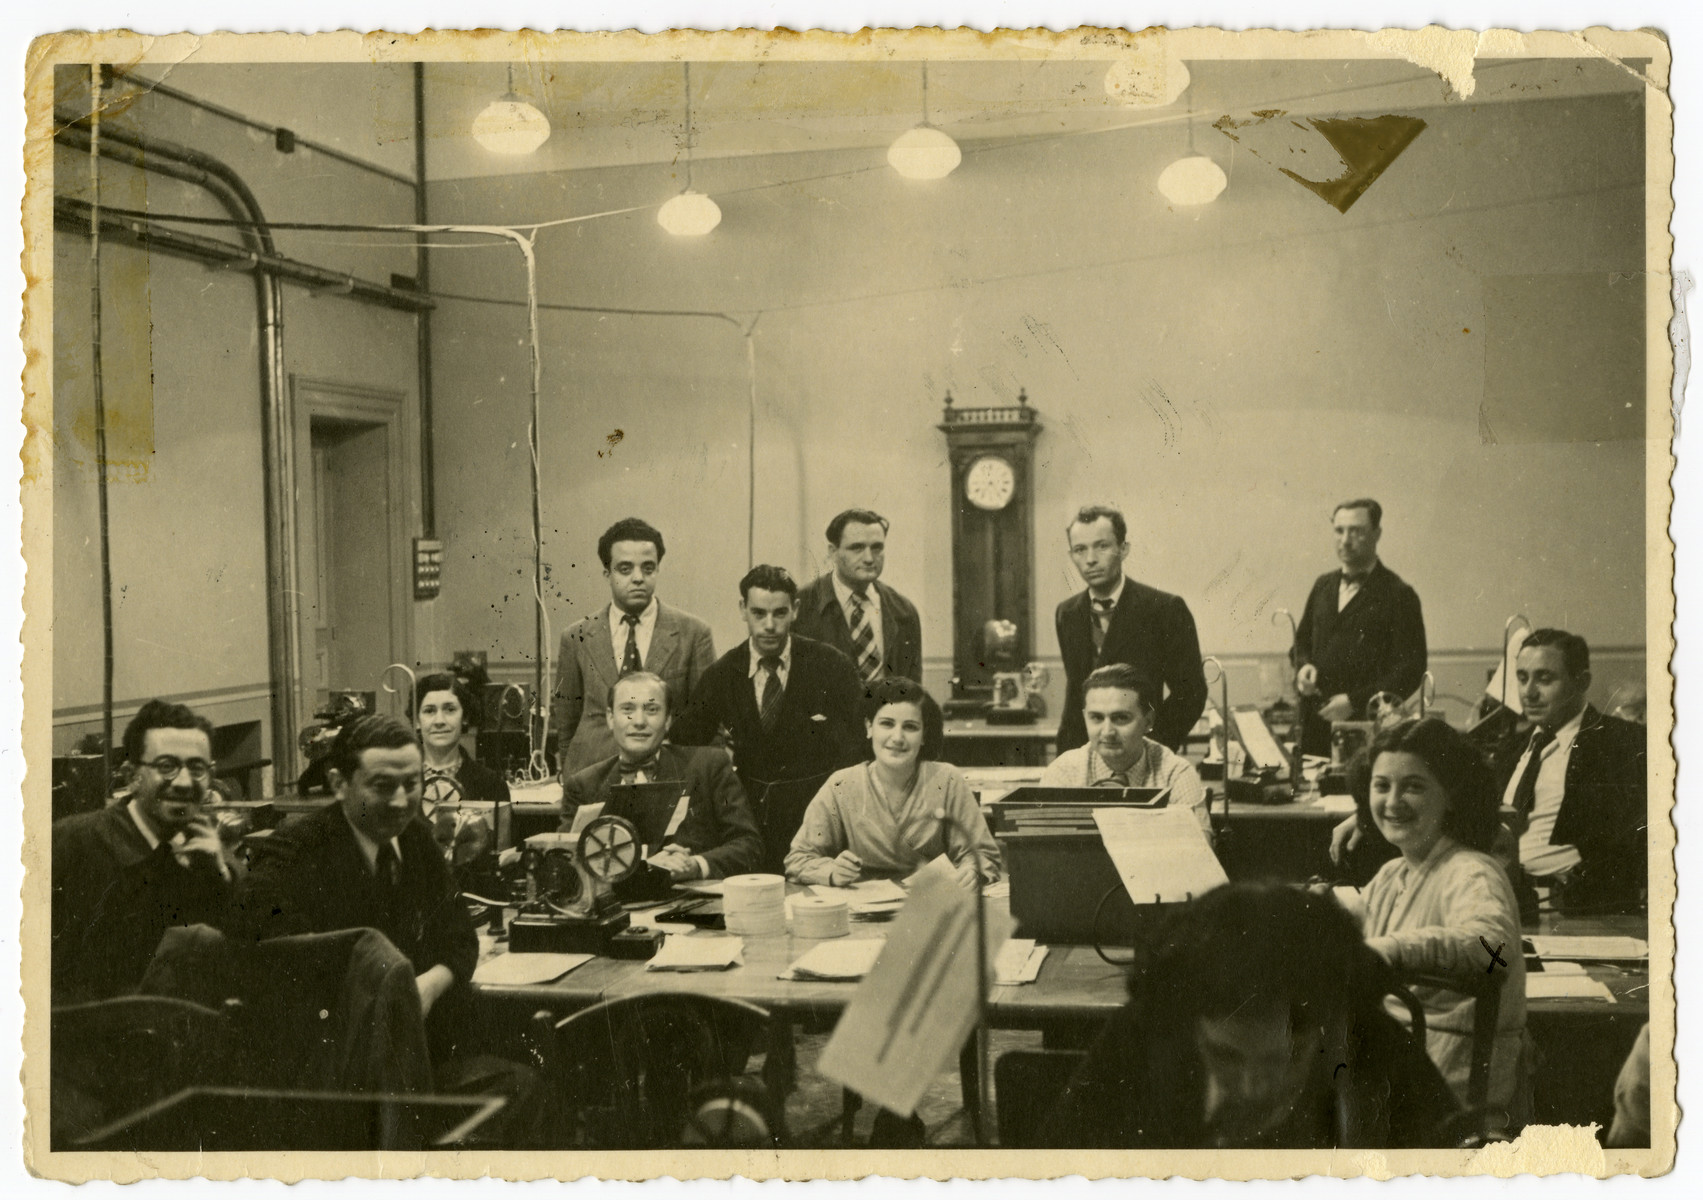 Workers of the Central Telegraph Office in Tunis operate their teletypes.

Arlette el Haik (later Benichou) is seated in the right hand corner.